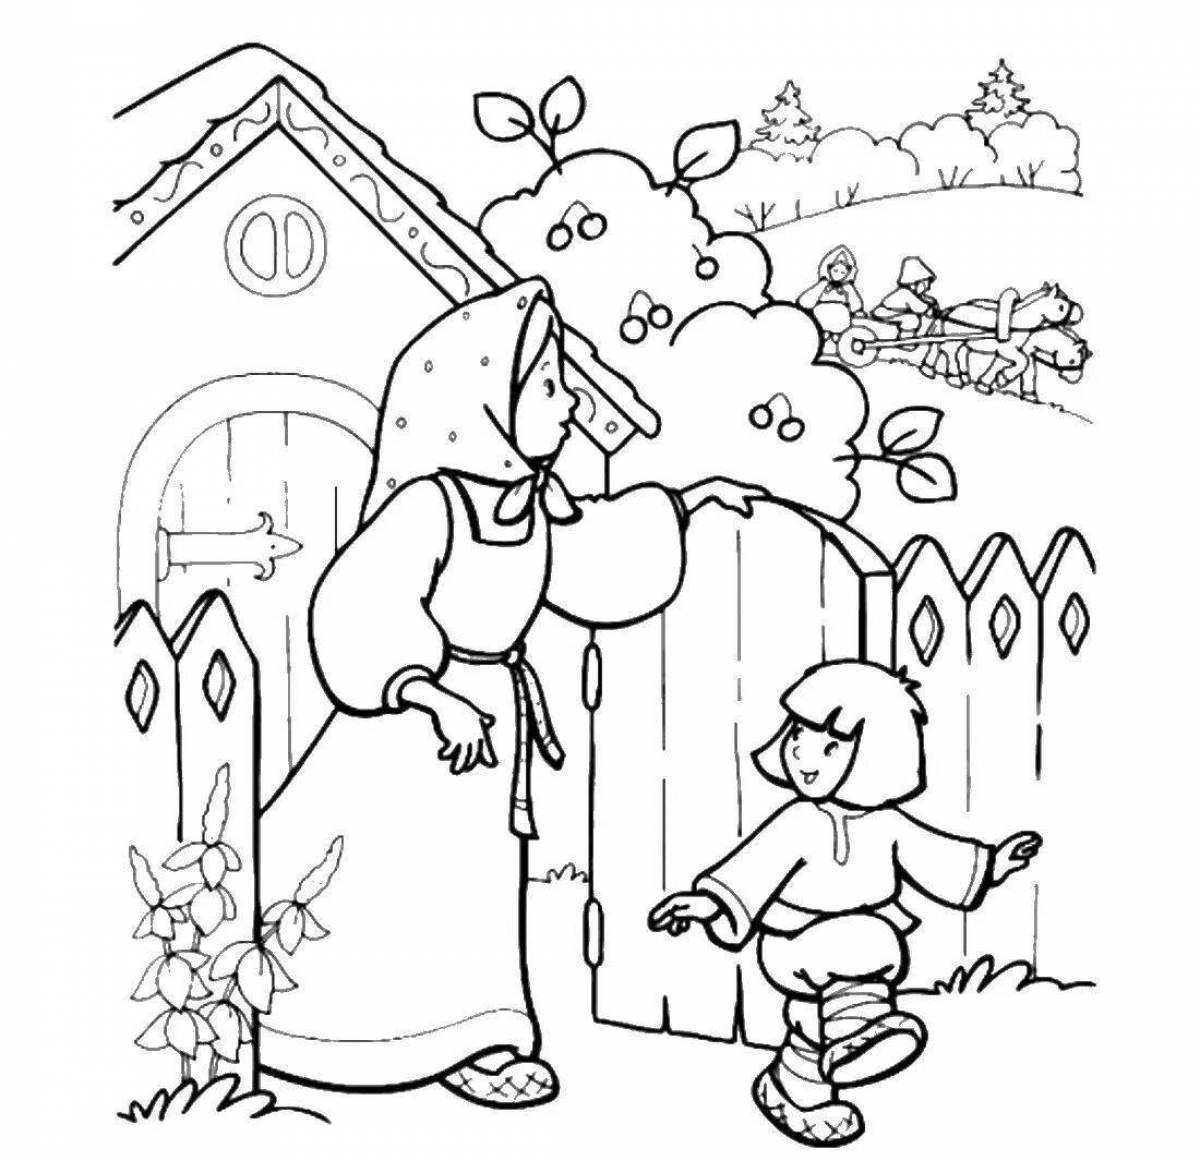 Fabulous big-eyed fear coloring book for a fairy tale